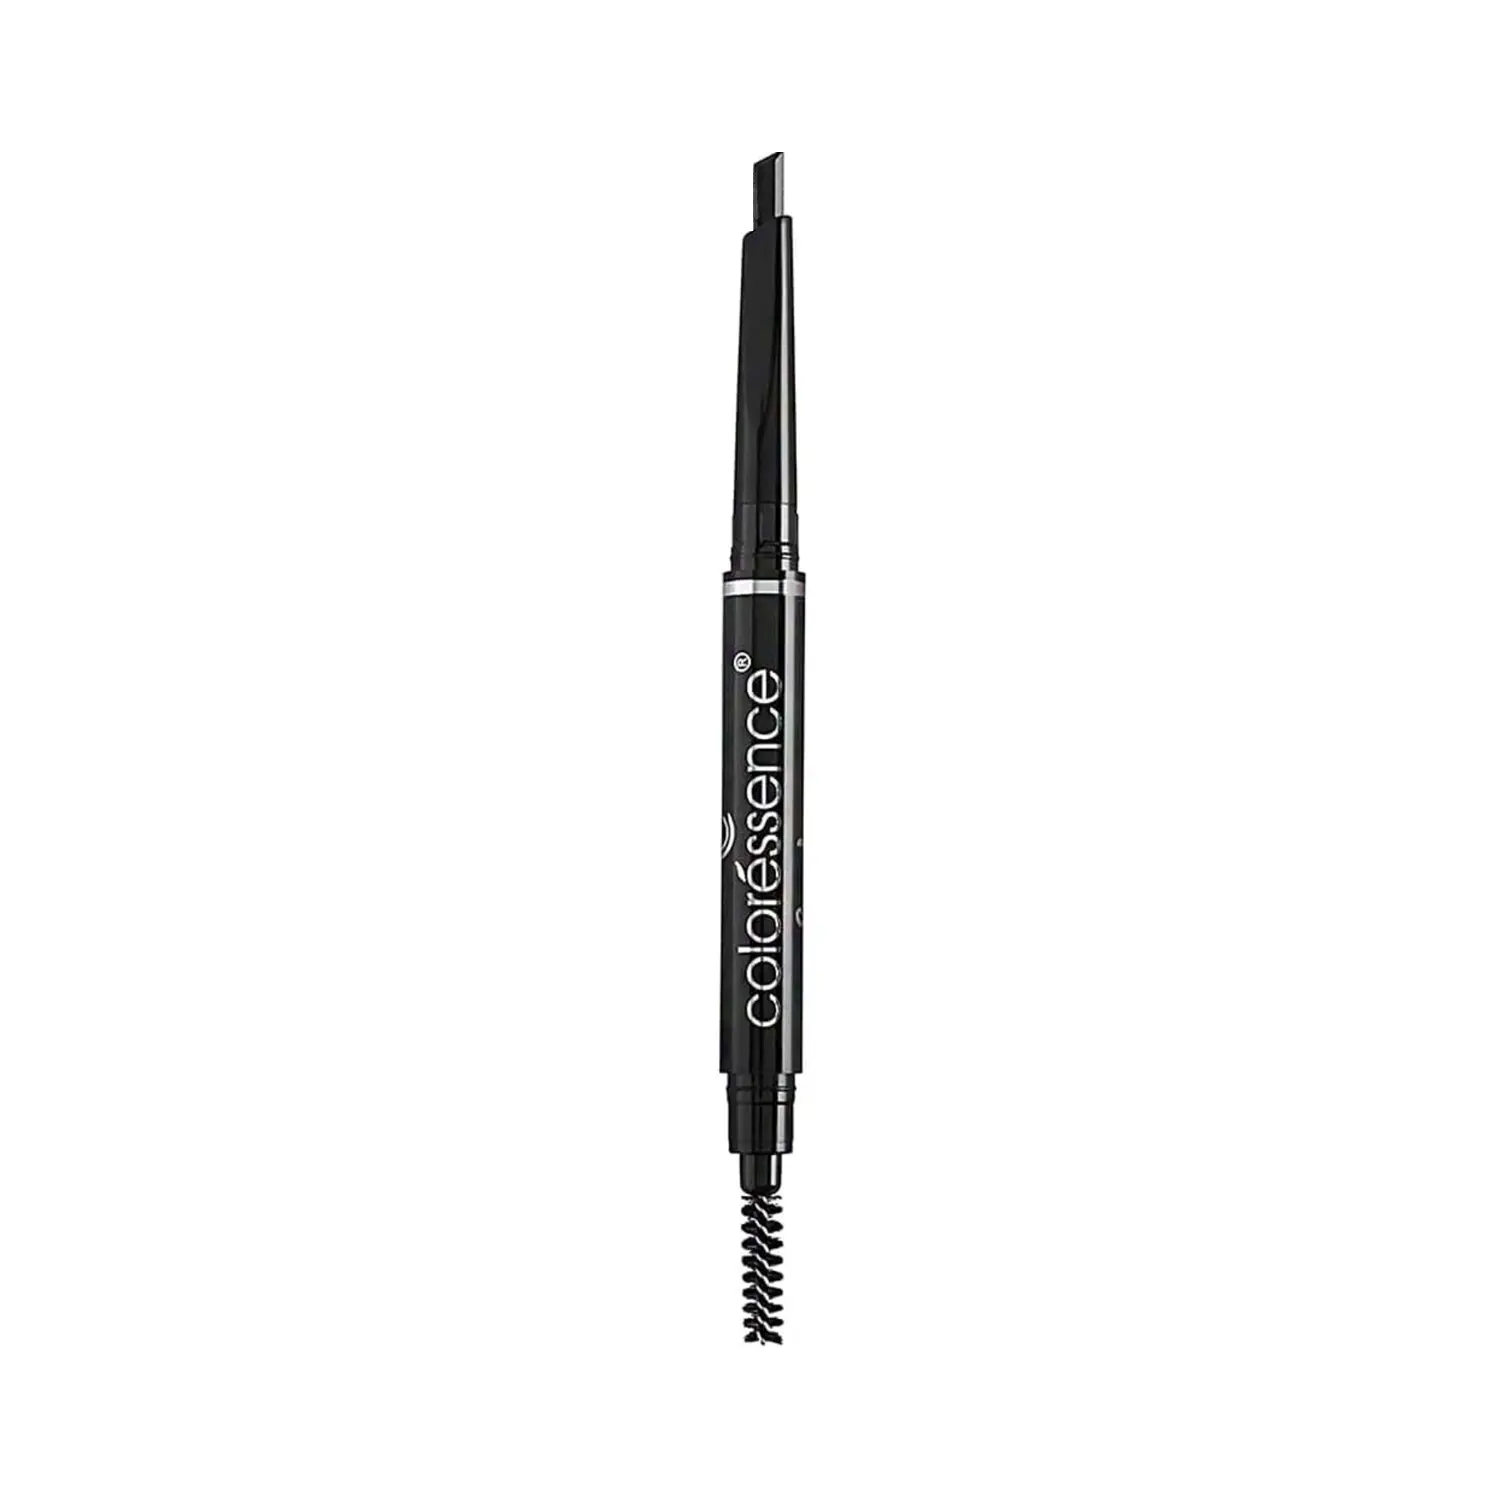 Coloressence | Coloressence Expert Eye Brow Pencil 2 In 1 Dual Function Eye Brow Filling Pencil Spoolie Shaping Brush With Eyebrow Styler - Grey (0.25g)